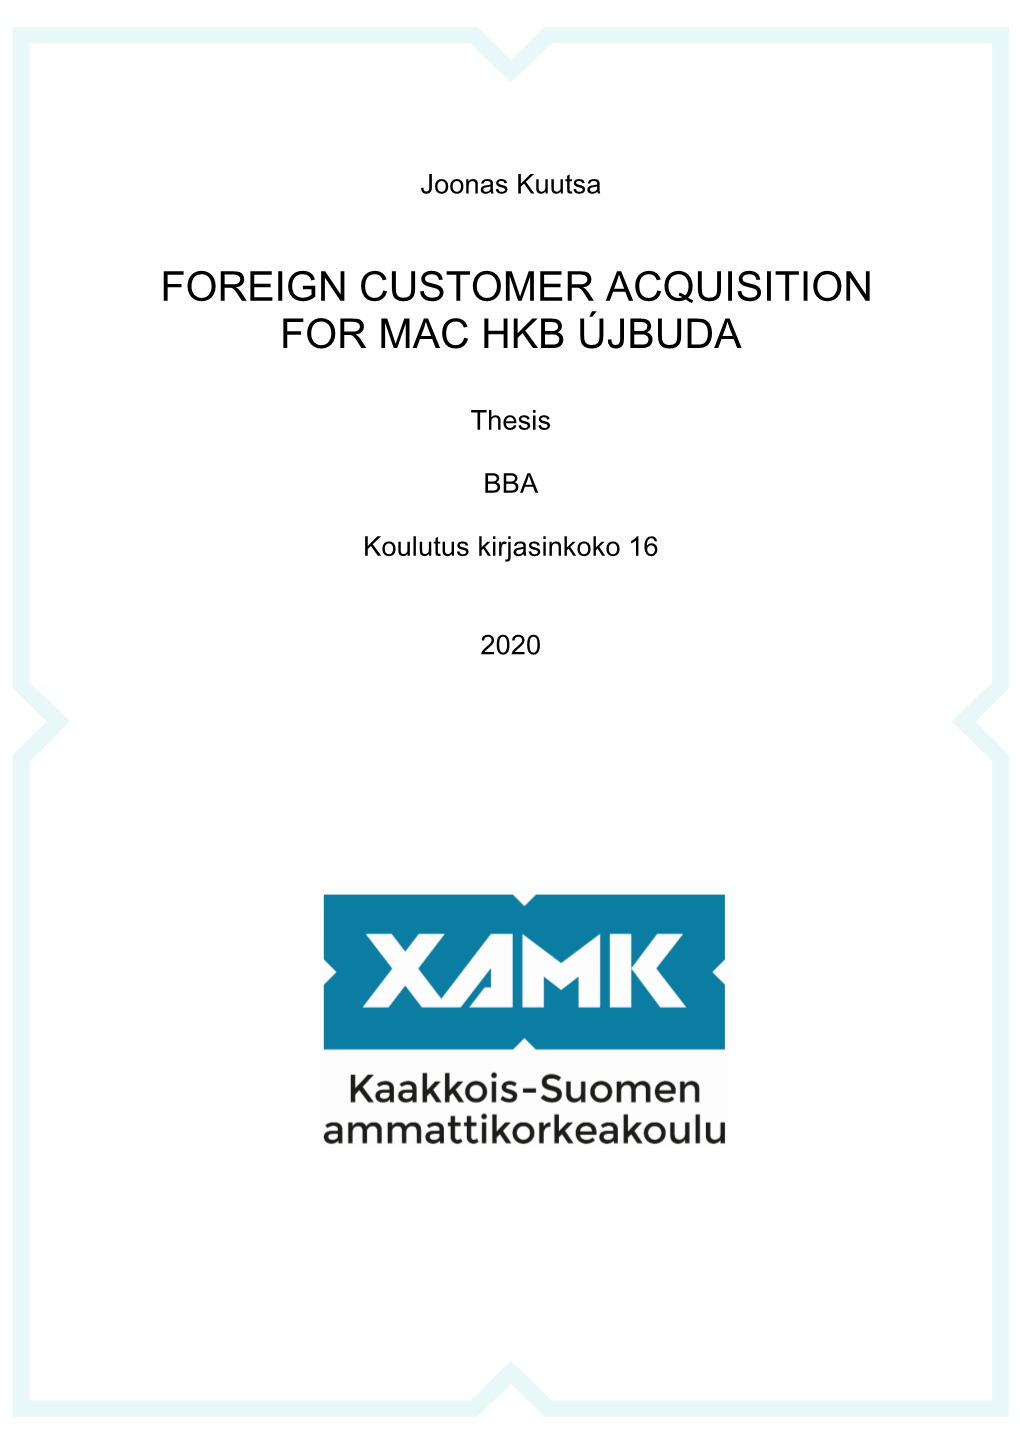 Foreign Customer Acquisition for MAC HKB Újbuda Commissioned by MAC HKB Újbuda Time 2021 Pages 32 Pages, 5 Pages of Appendices Supervisor Jarmo Kulhelm